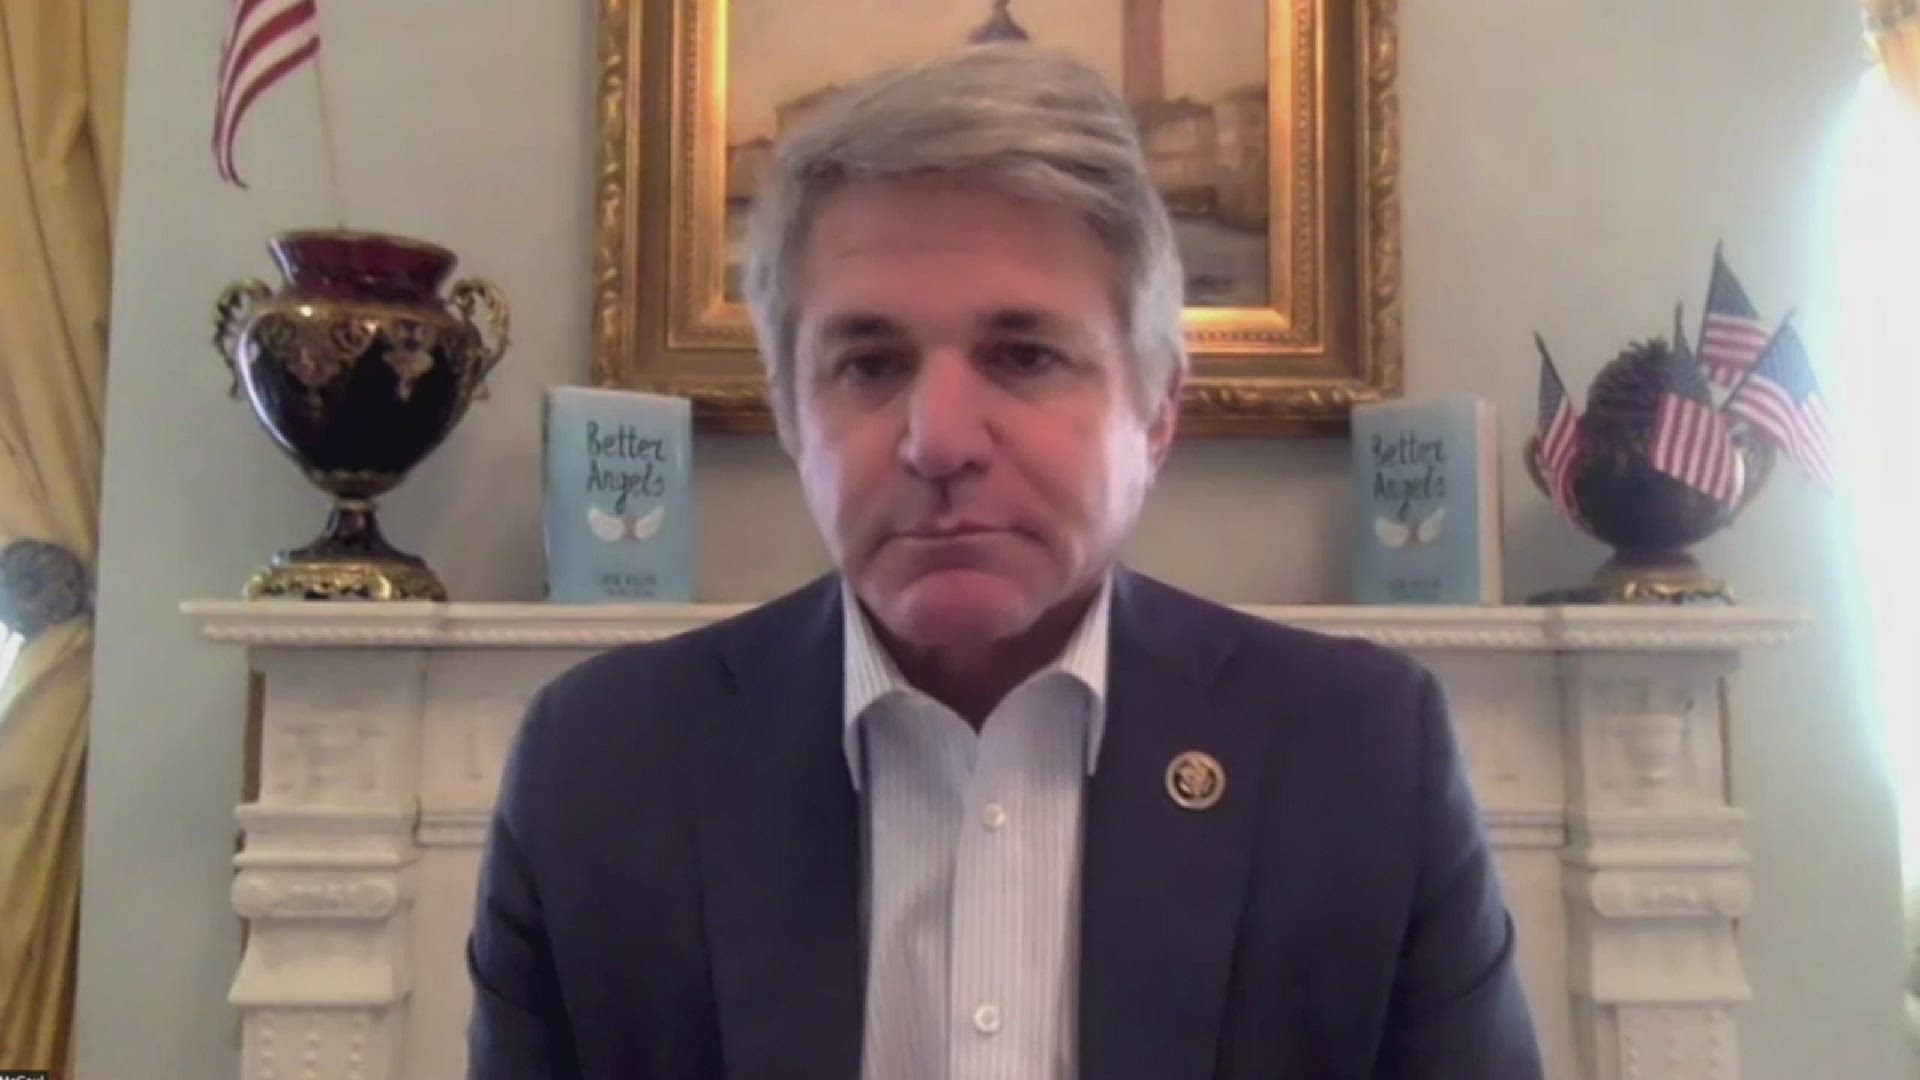 “We’re going to have to open the Capitol back up. But as a former federal prosecutor... it all has to be threat-based," said U.S. Rep. Michael McCaul, R-Texas.